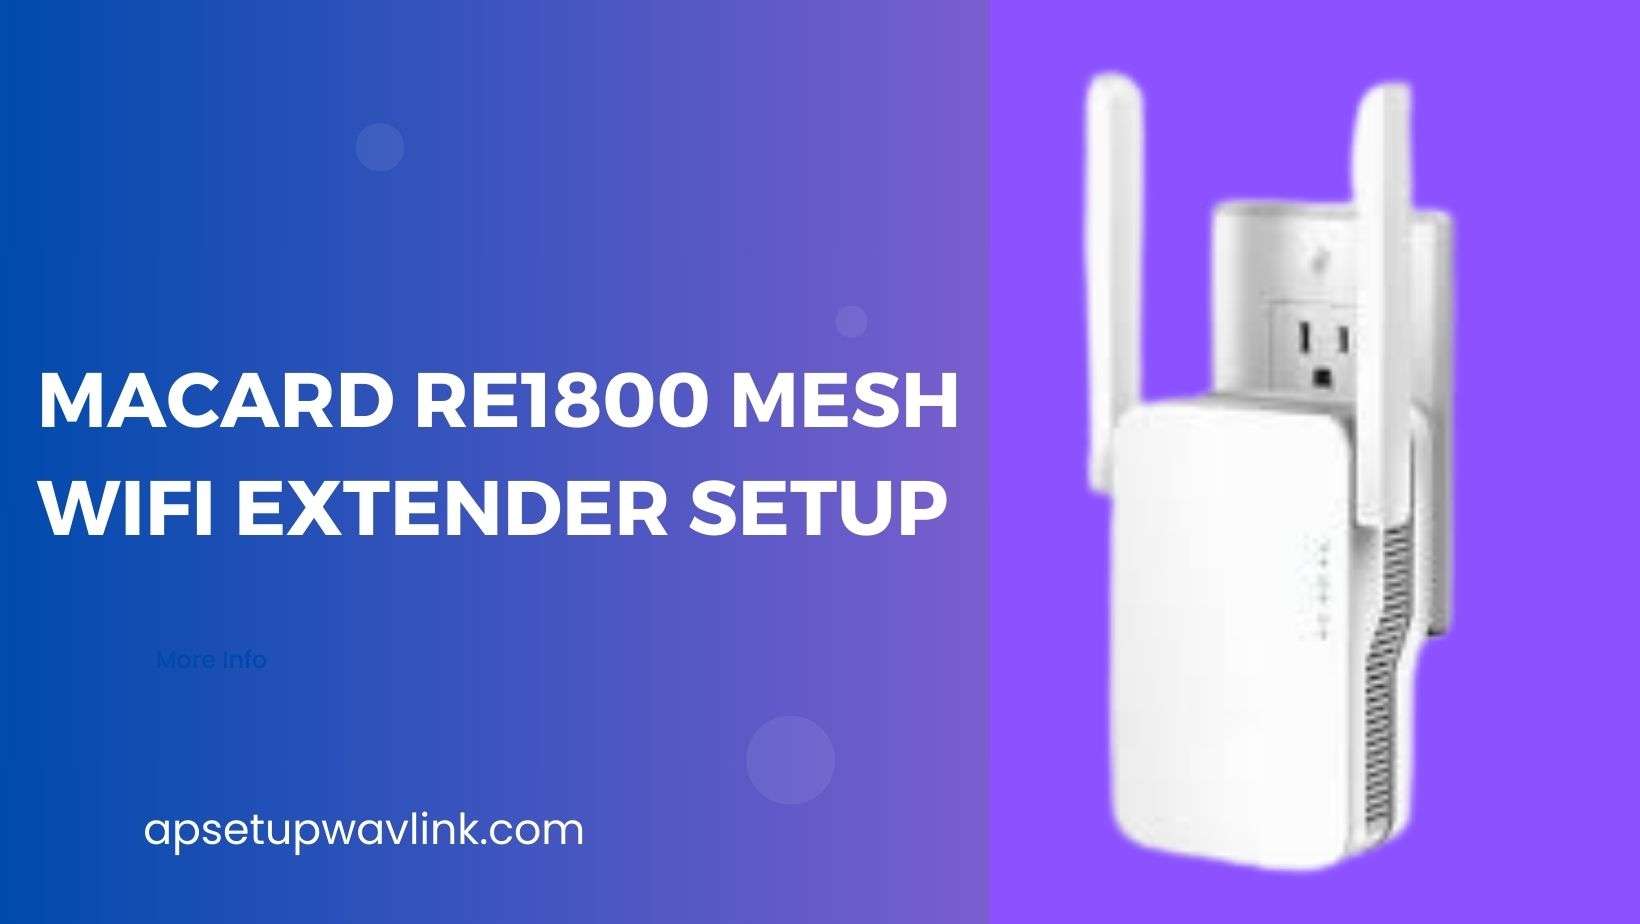 You are currently viewing MACARD RE1800 Mesh WiFi Extender Setup